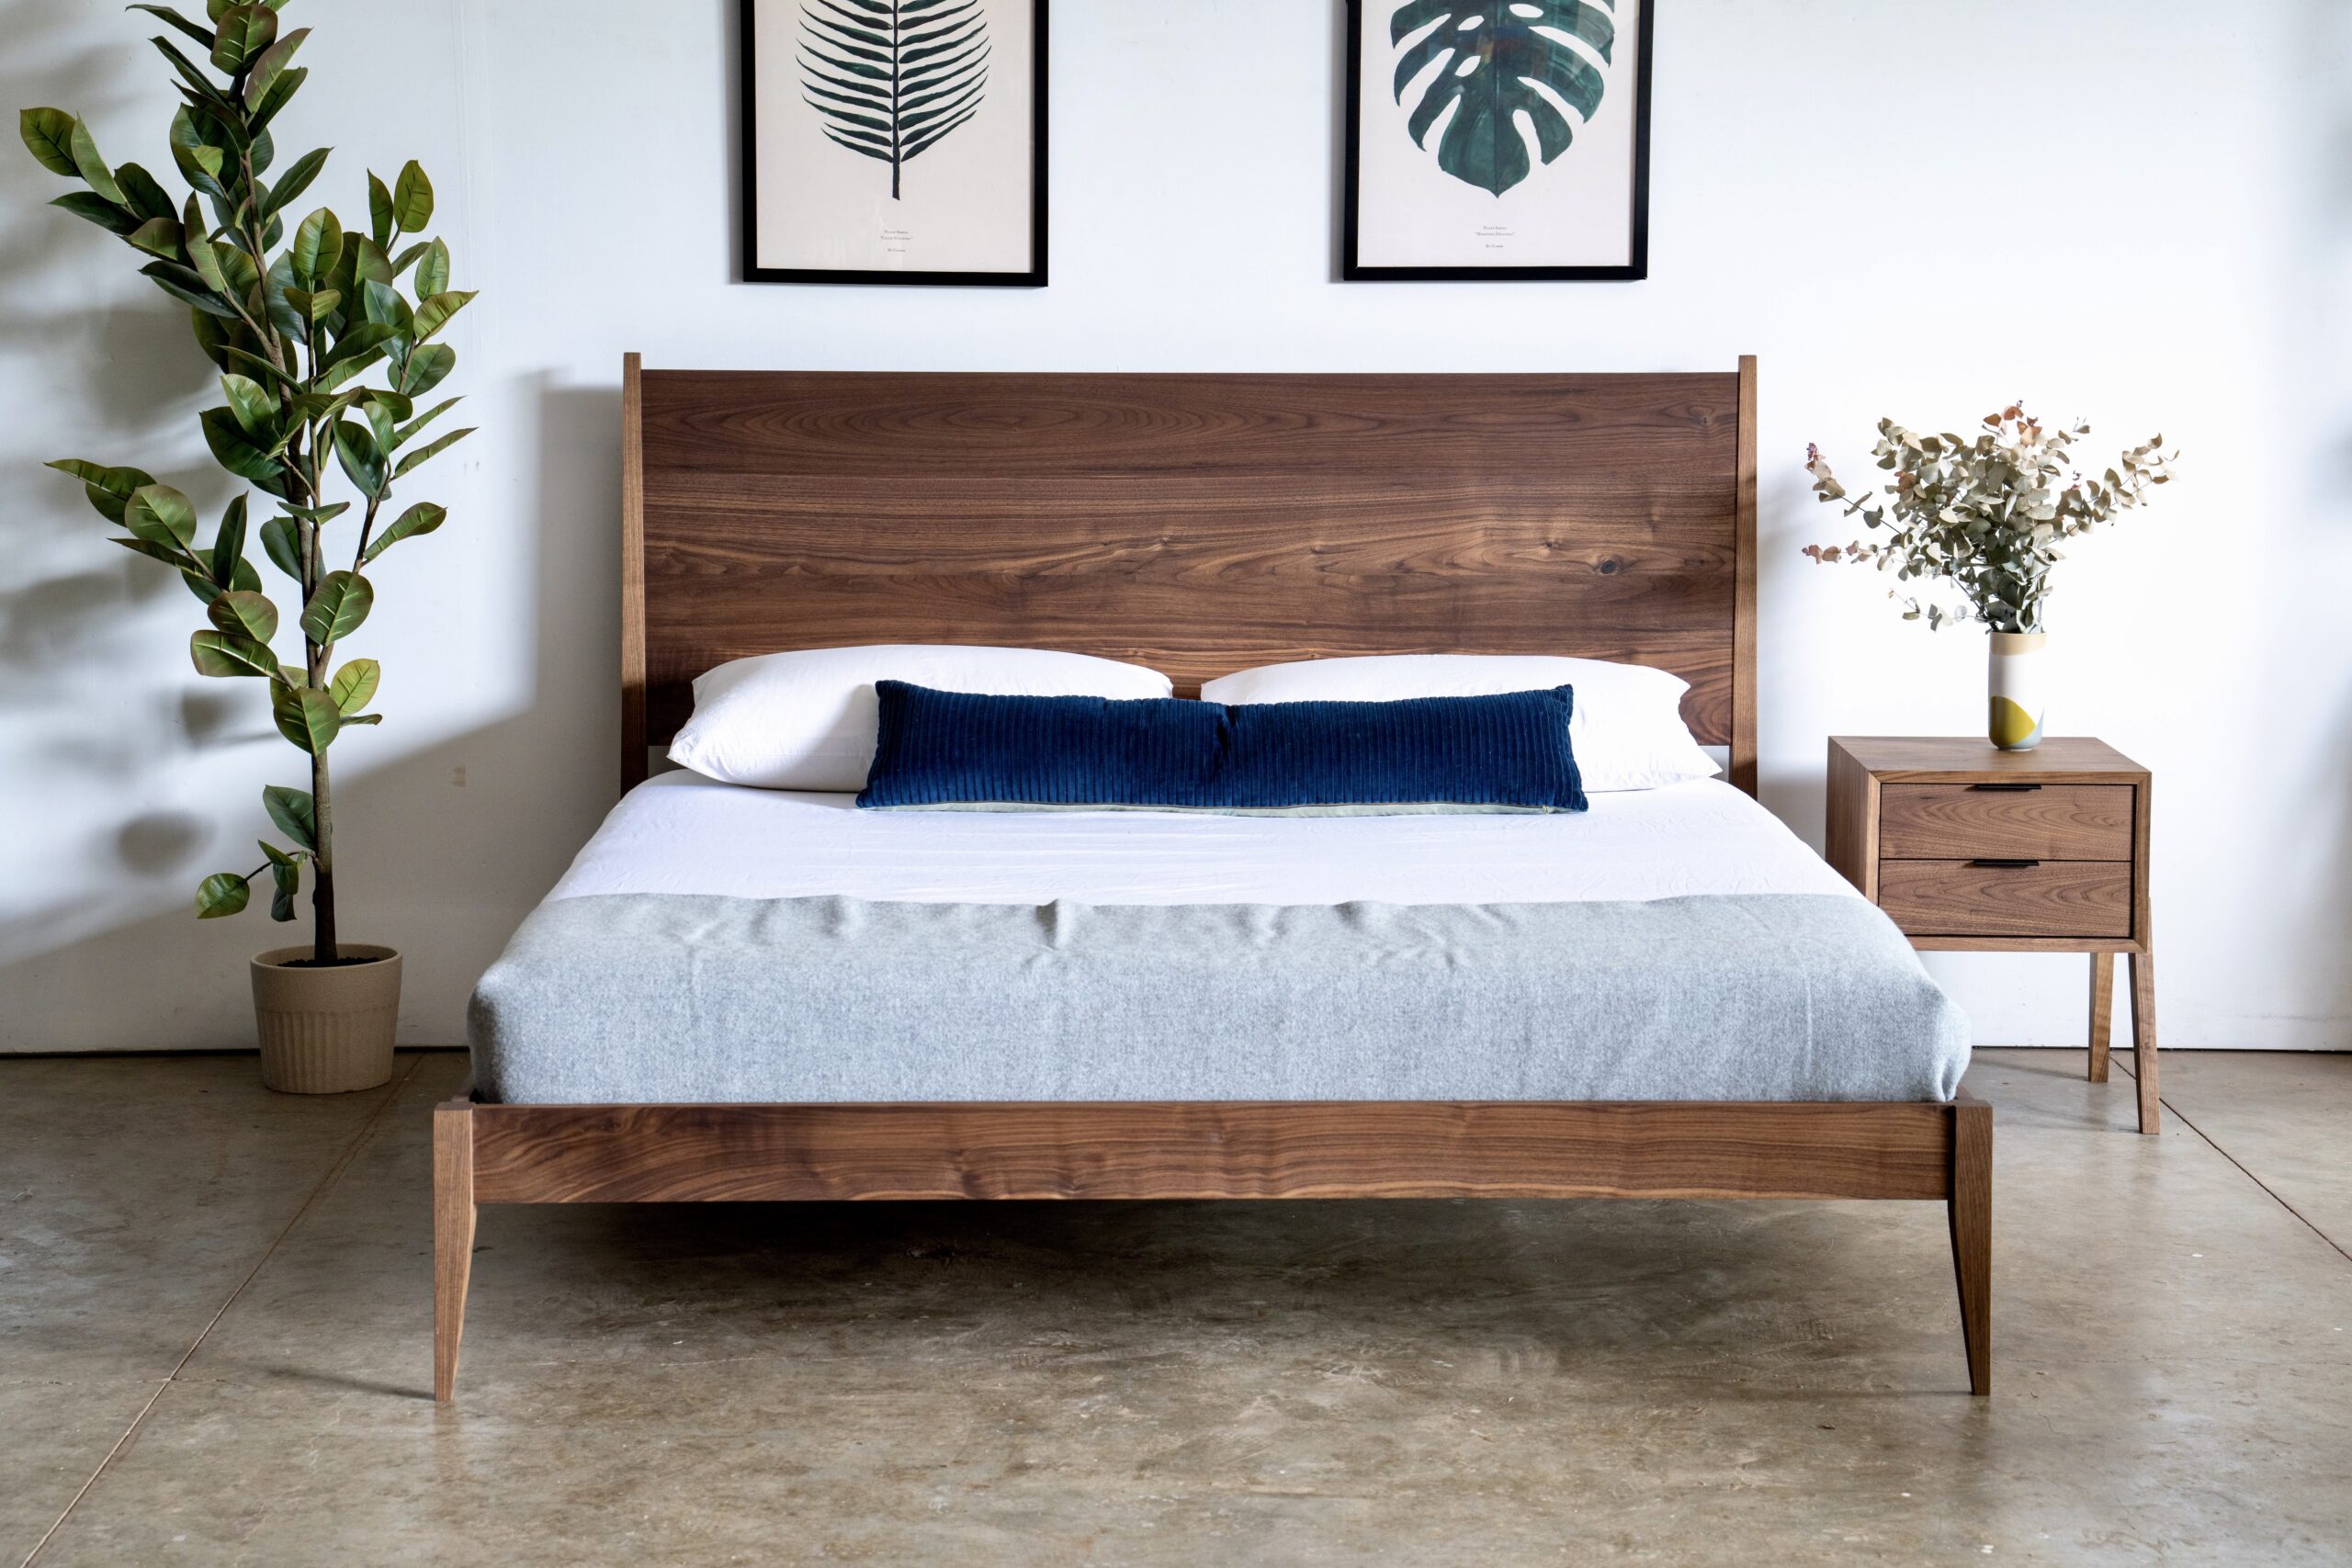 A simple walnut bed made up with a mattress and pillows. A two drawer walnut nightstands is next to it.